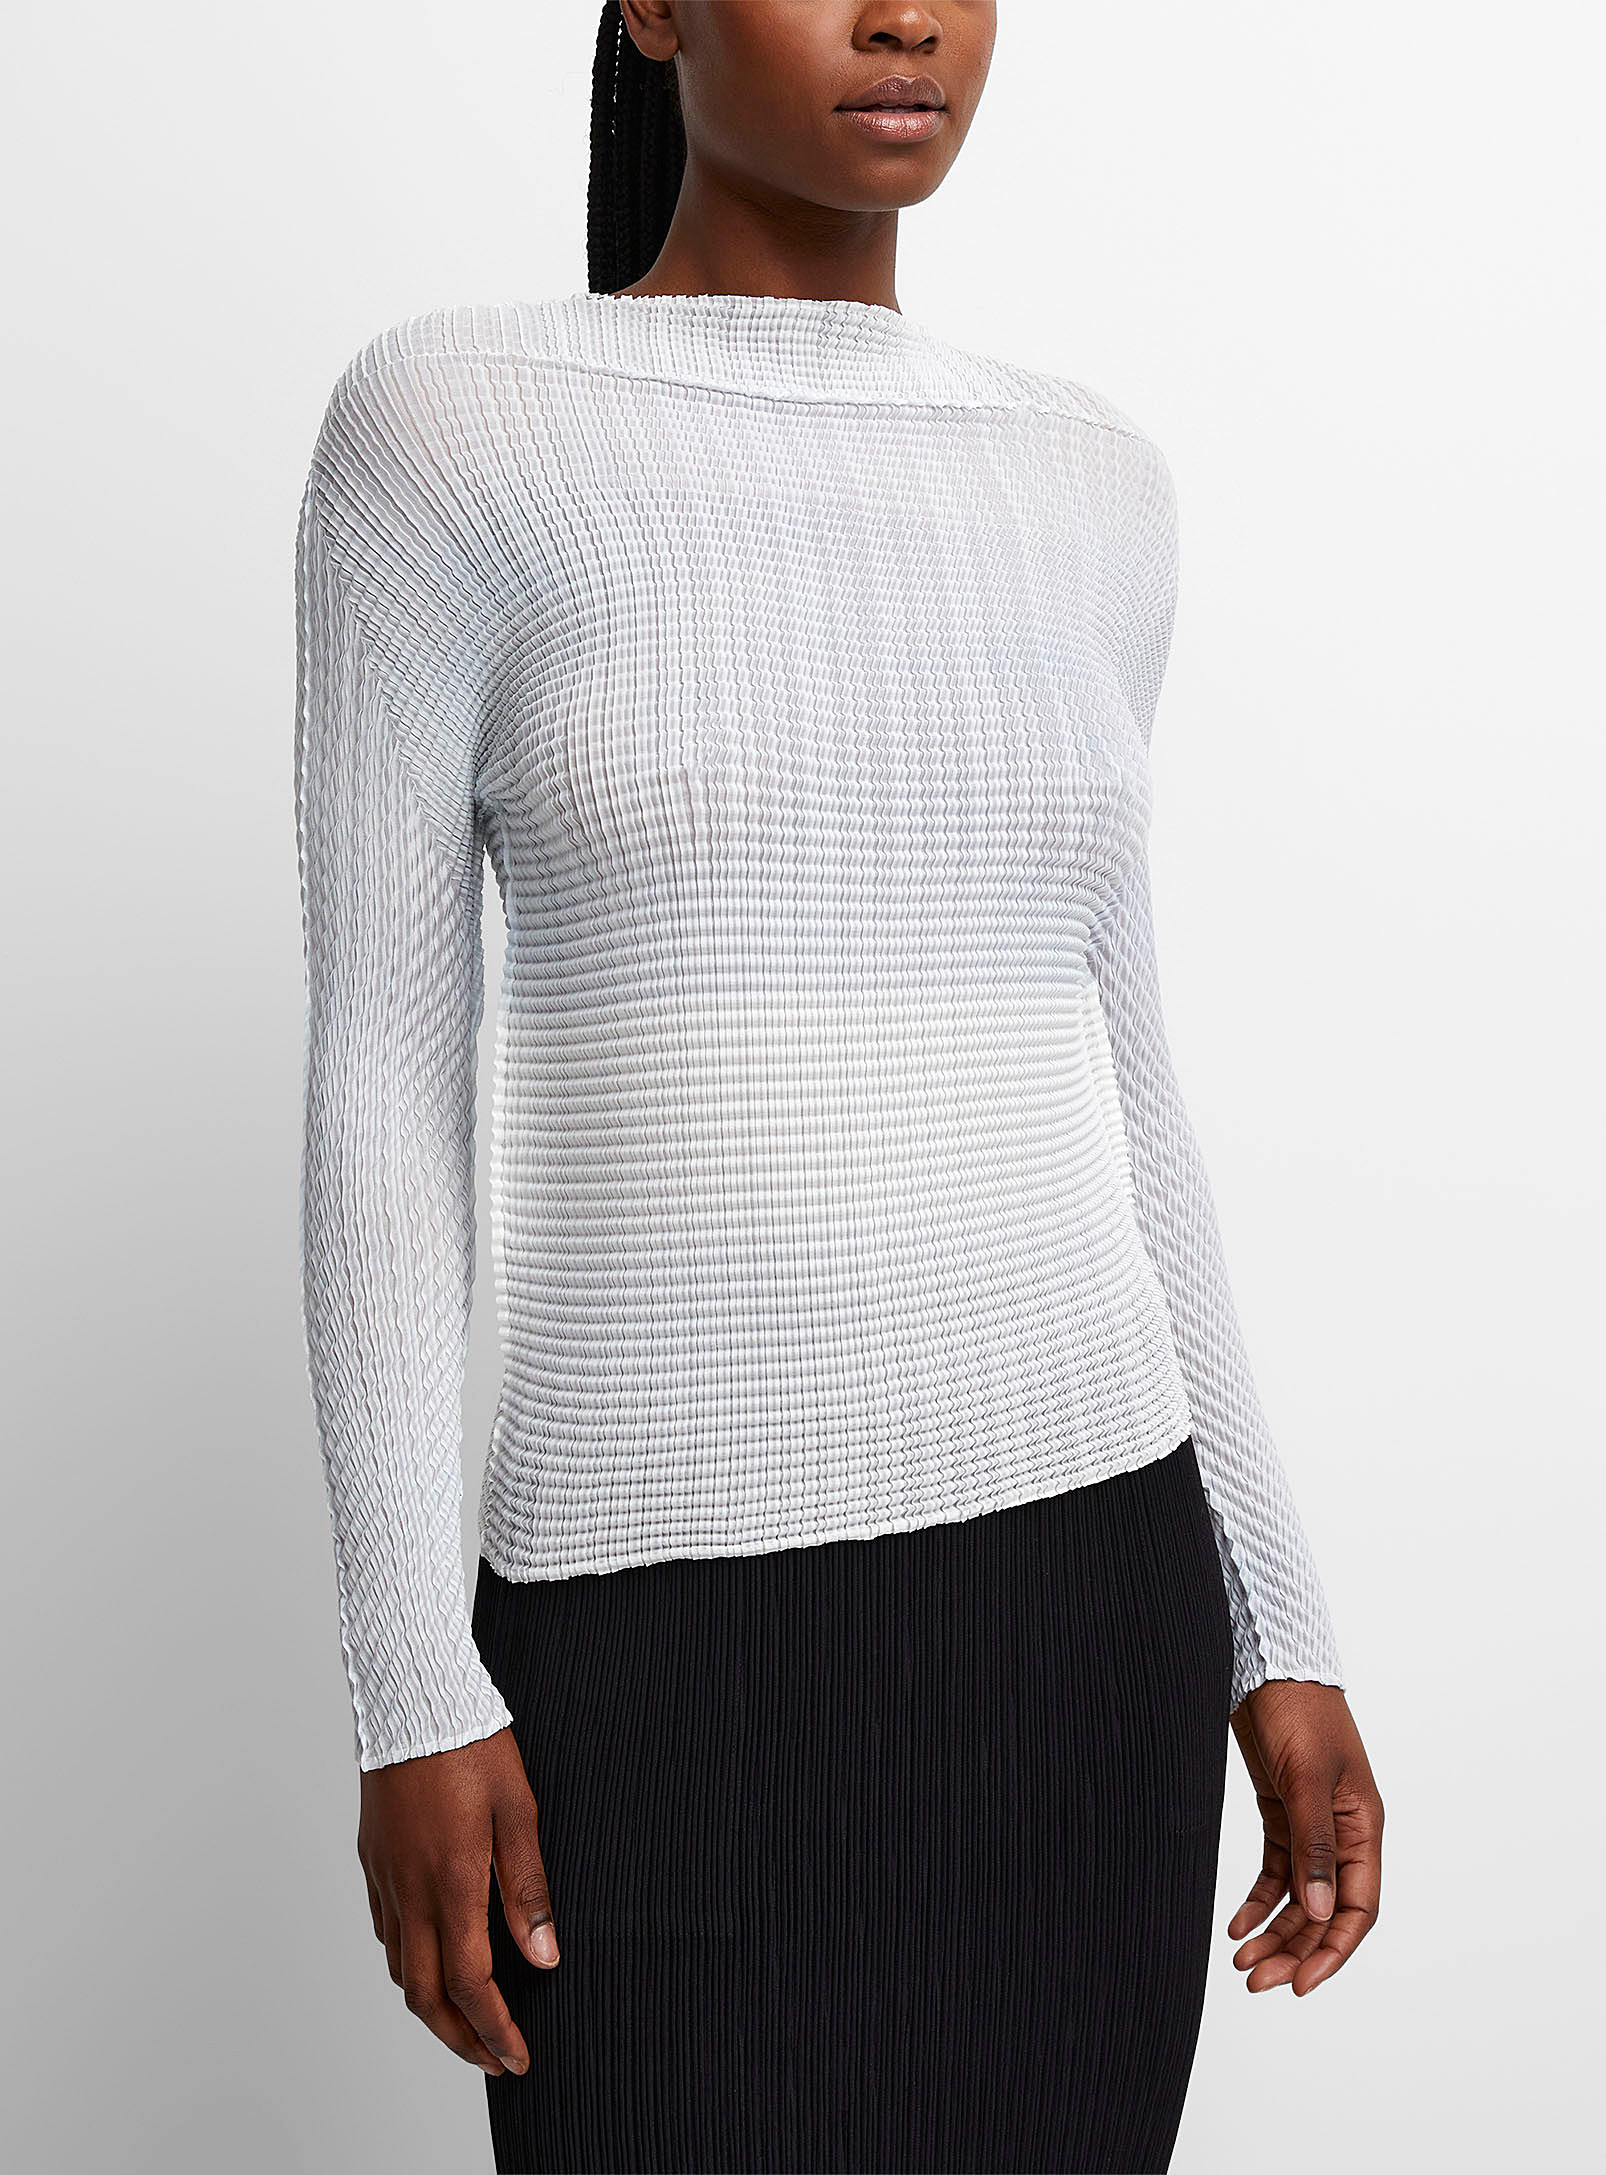 Issey Miyake Wooly Pleats Pastel Top In White